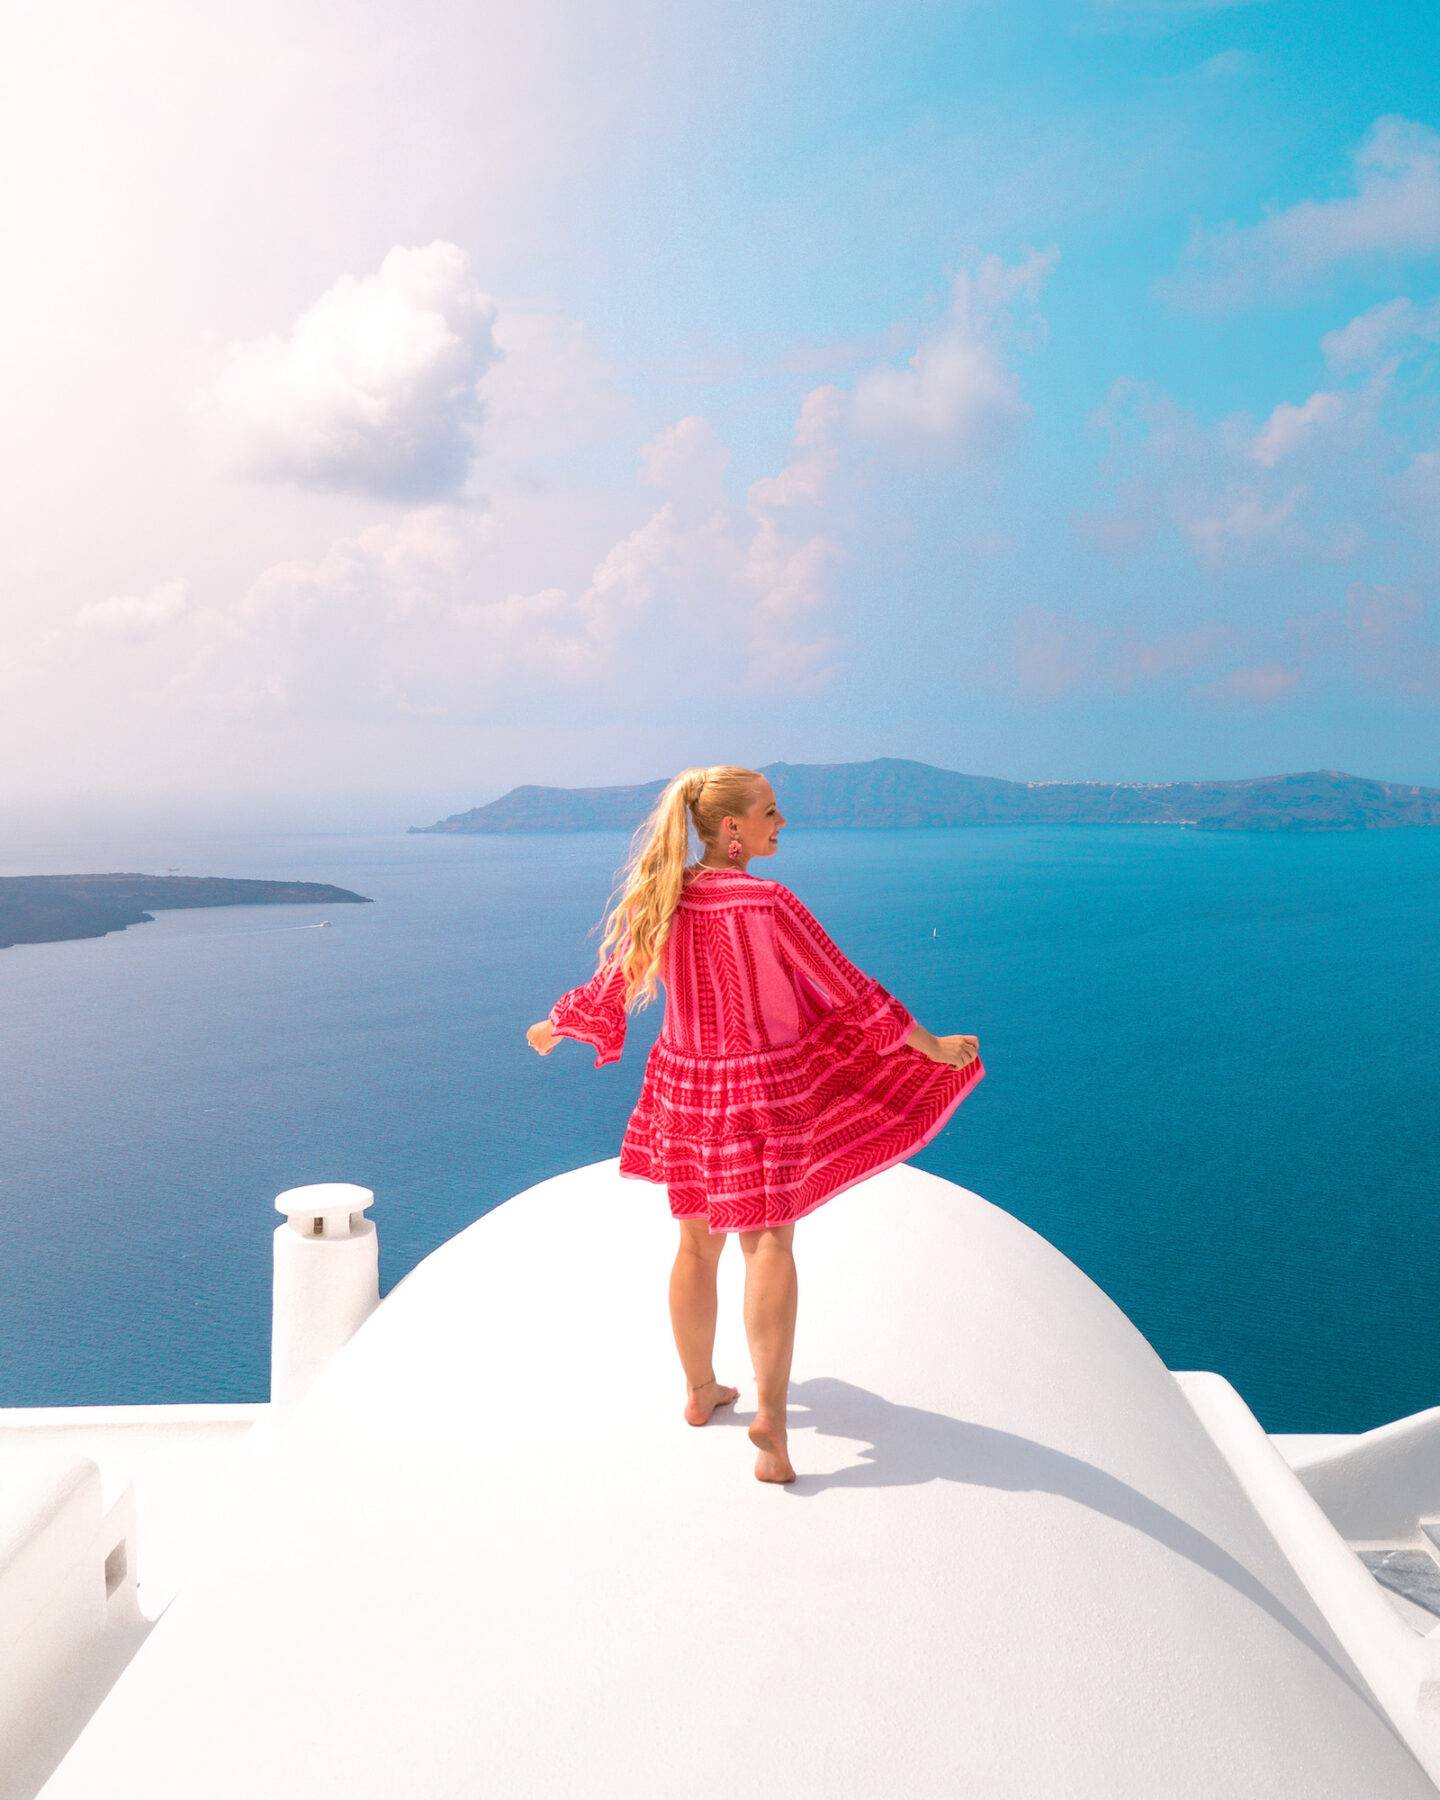 The best photo spots and most instagrammable places in Santorini: Fira rooftops overlooking the sea. Click the photo to see the rest of my list of the best instagram photo spots in Santorini!